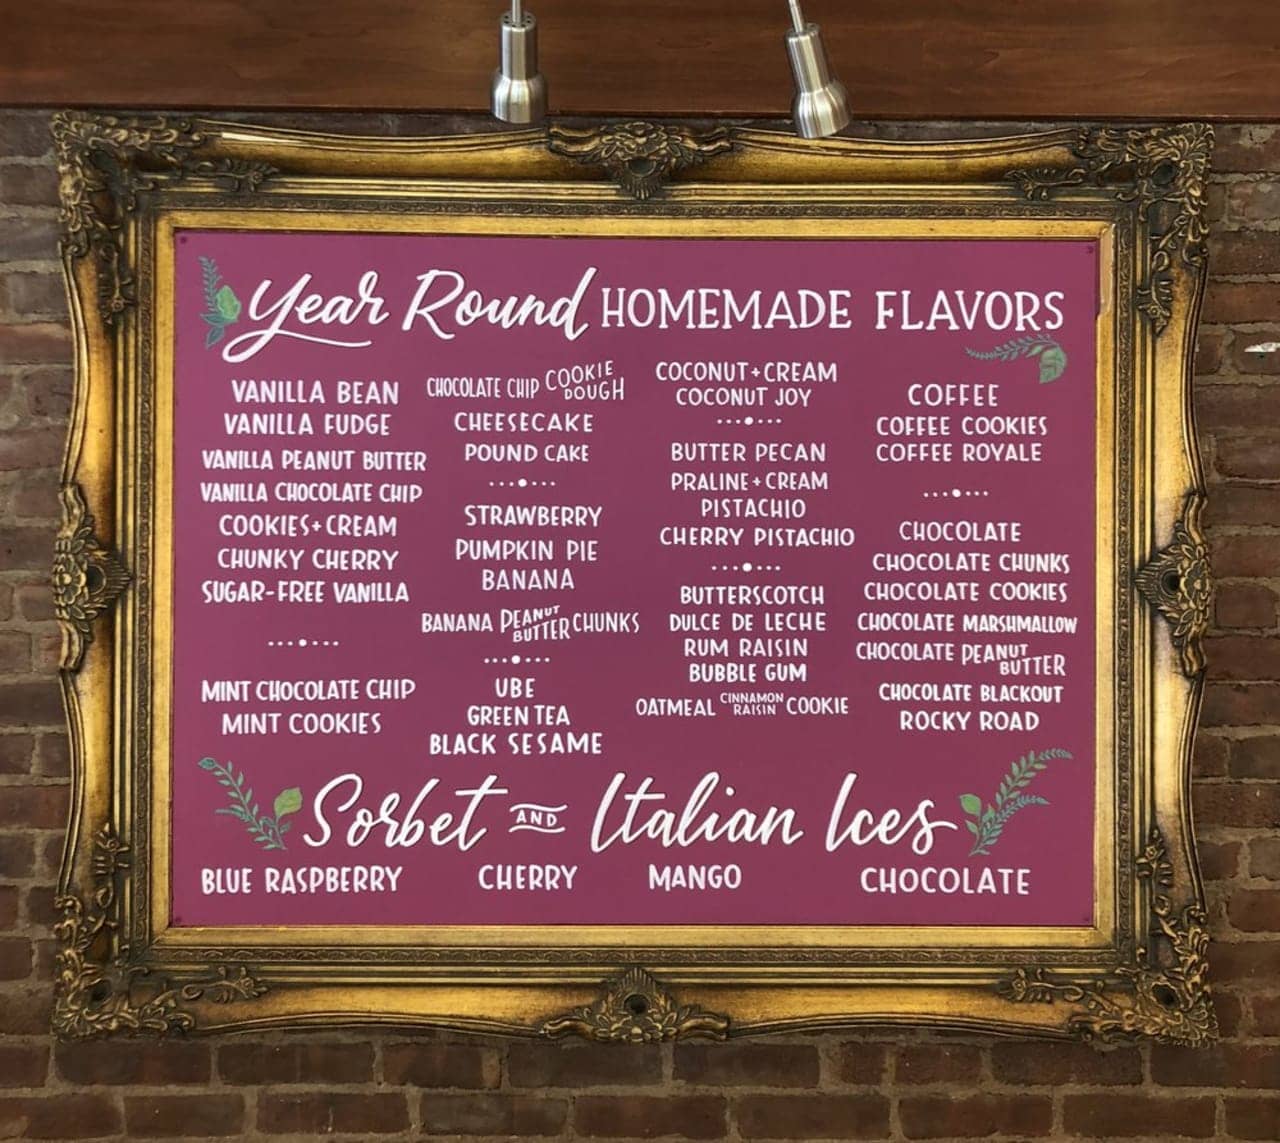 These are but the every-day flavors available at Torico Ice Cream in Jersey City.